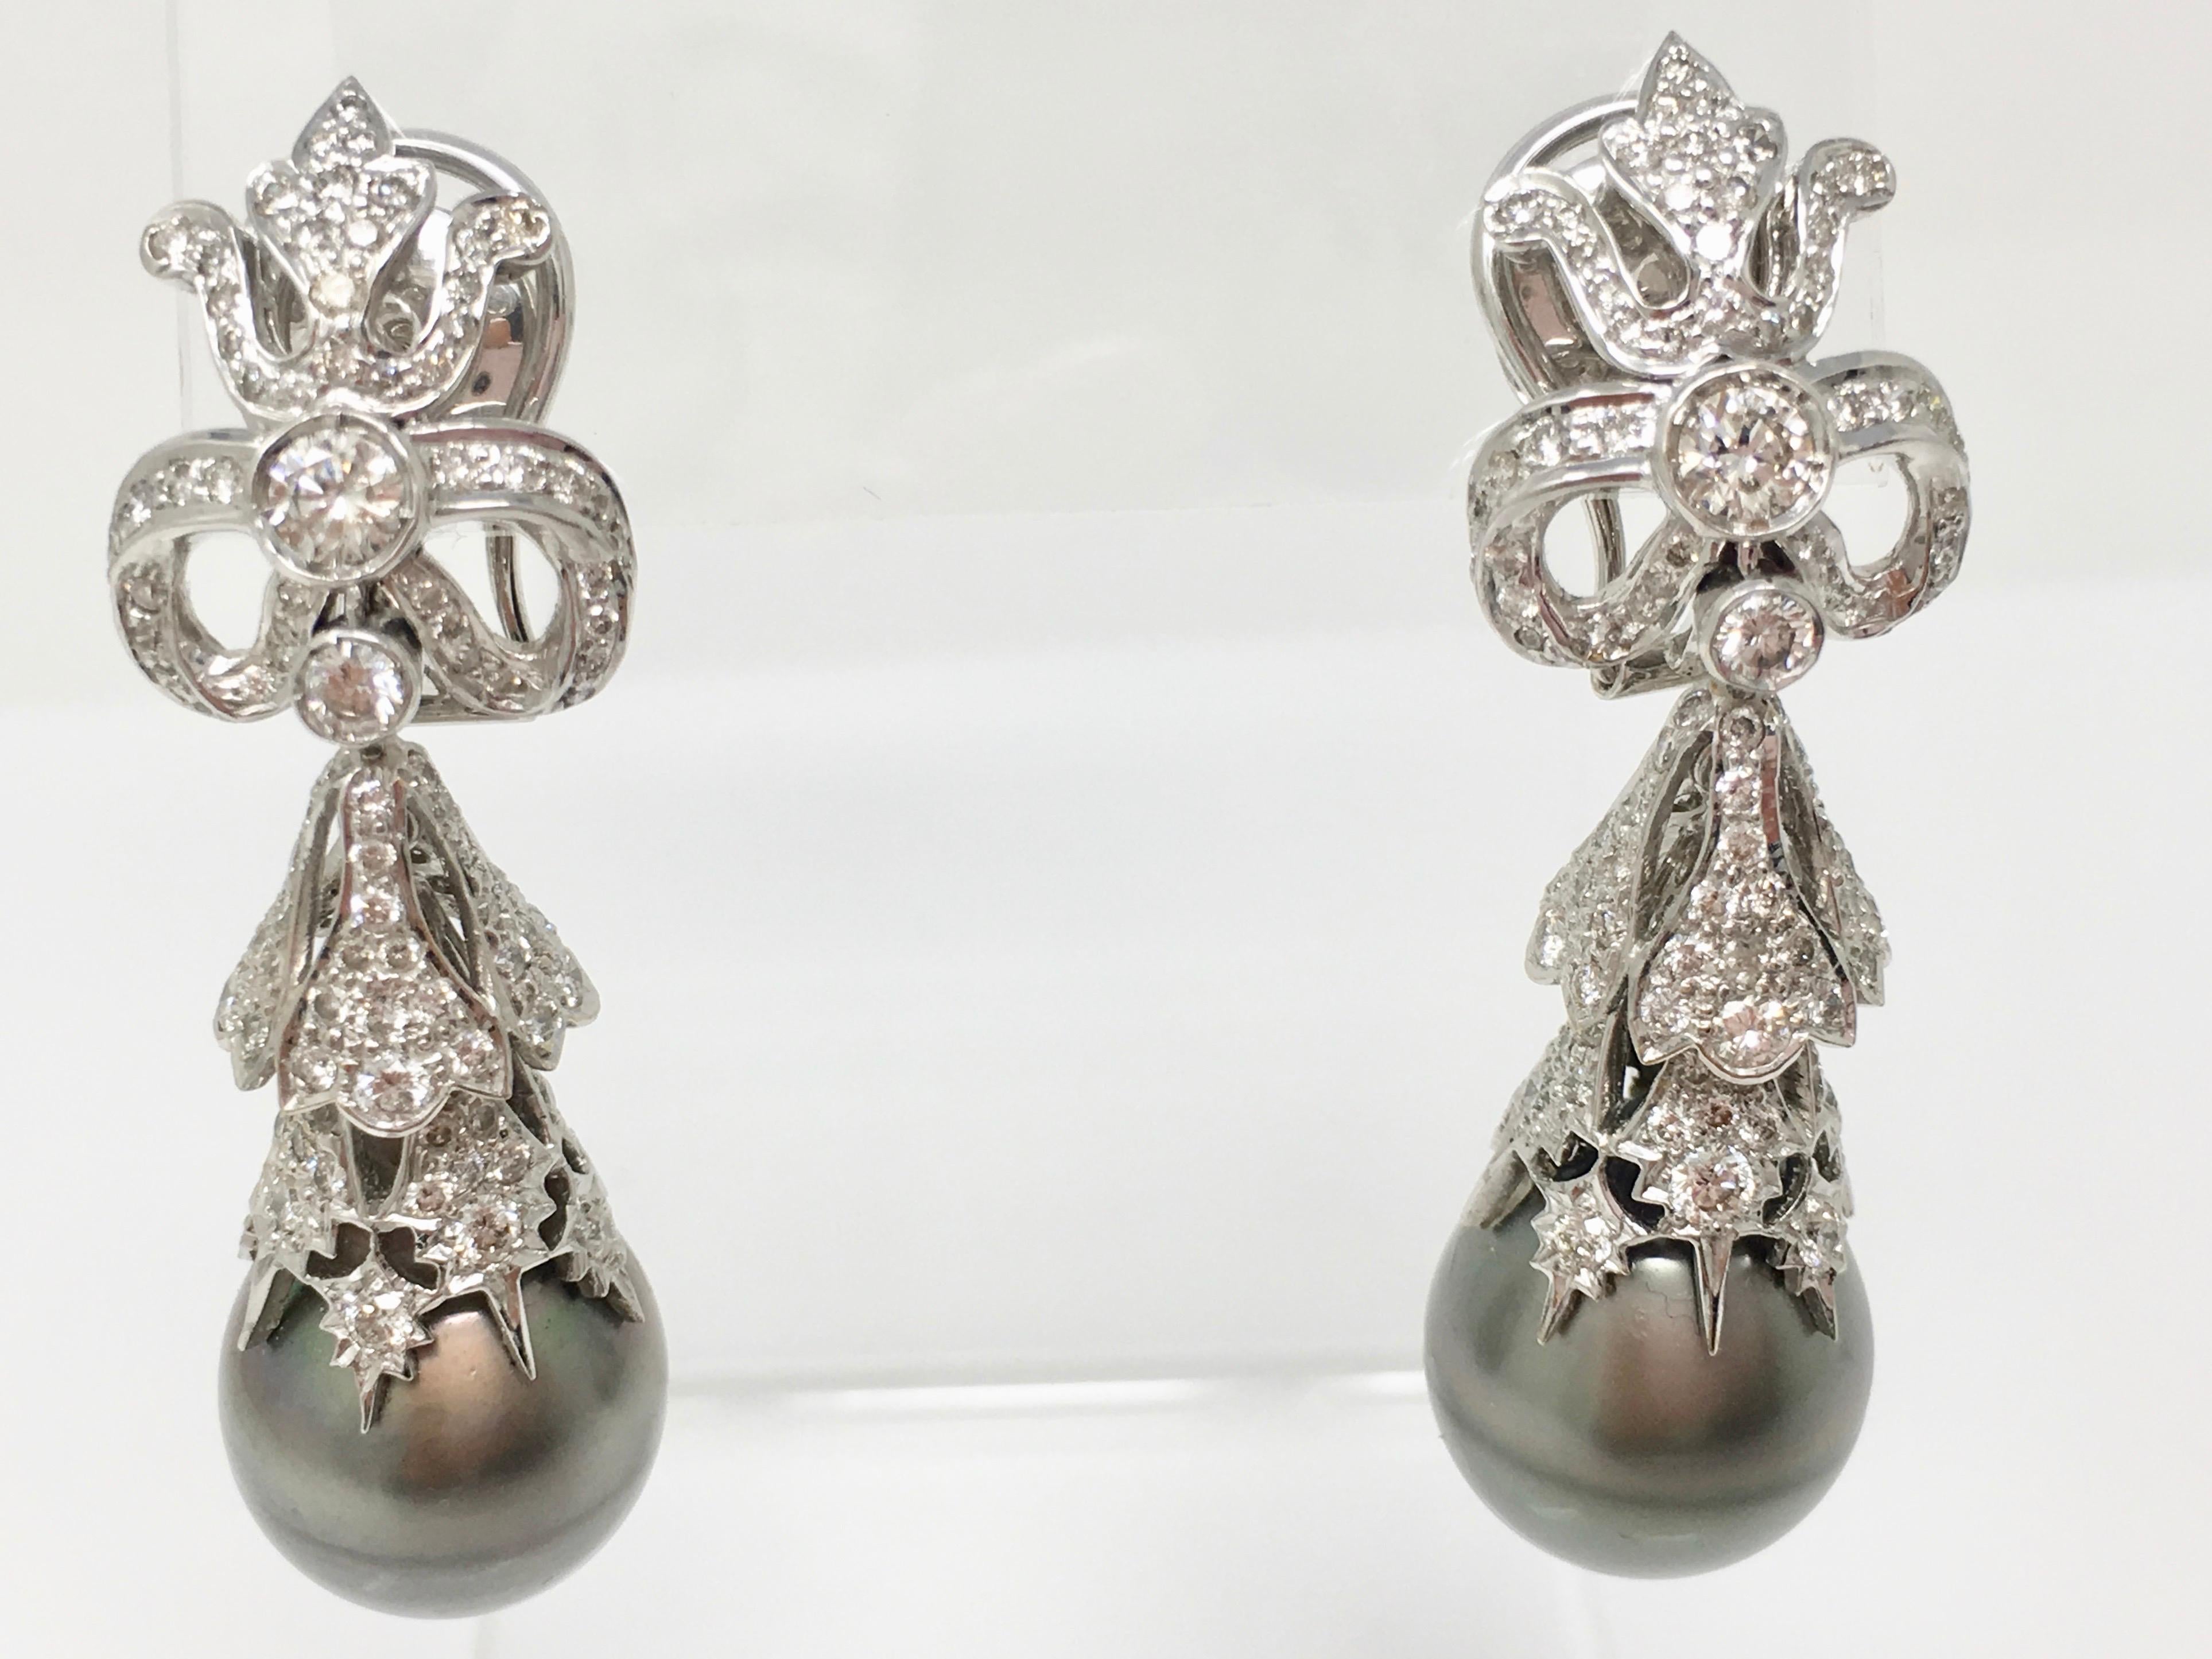 Round Cut 3.76 Carat White Round Brilliant Diamonds and South Sea Pearl Earrings in 18k